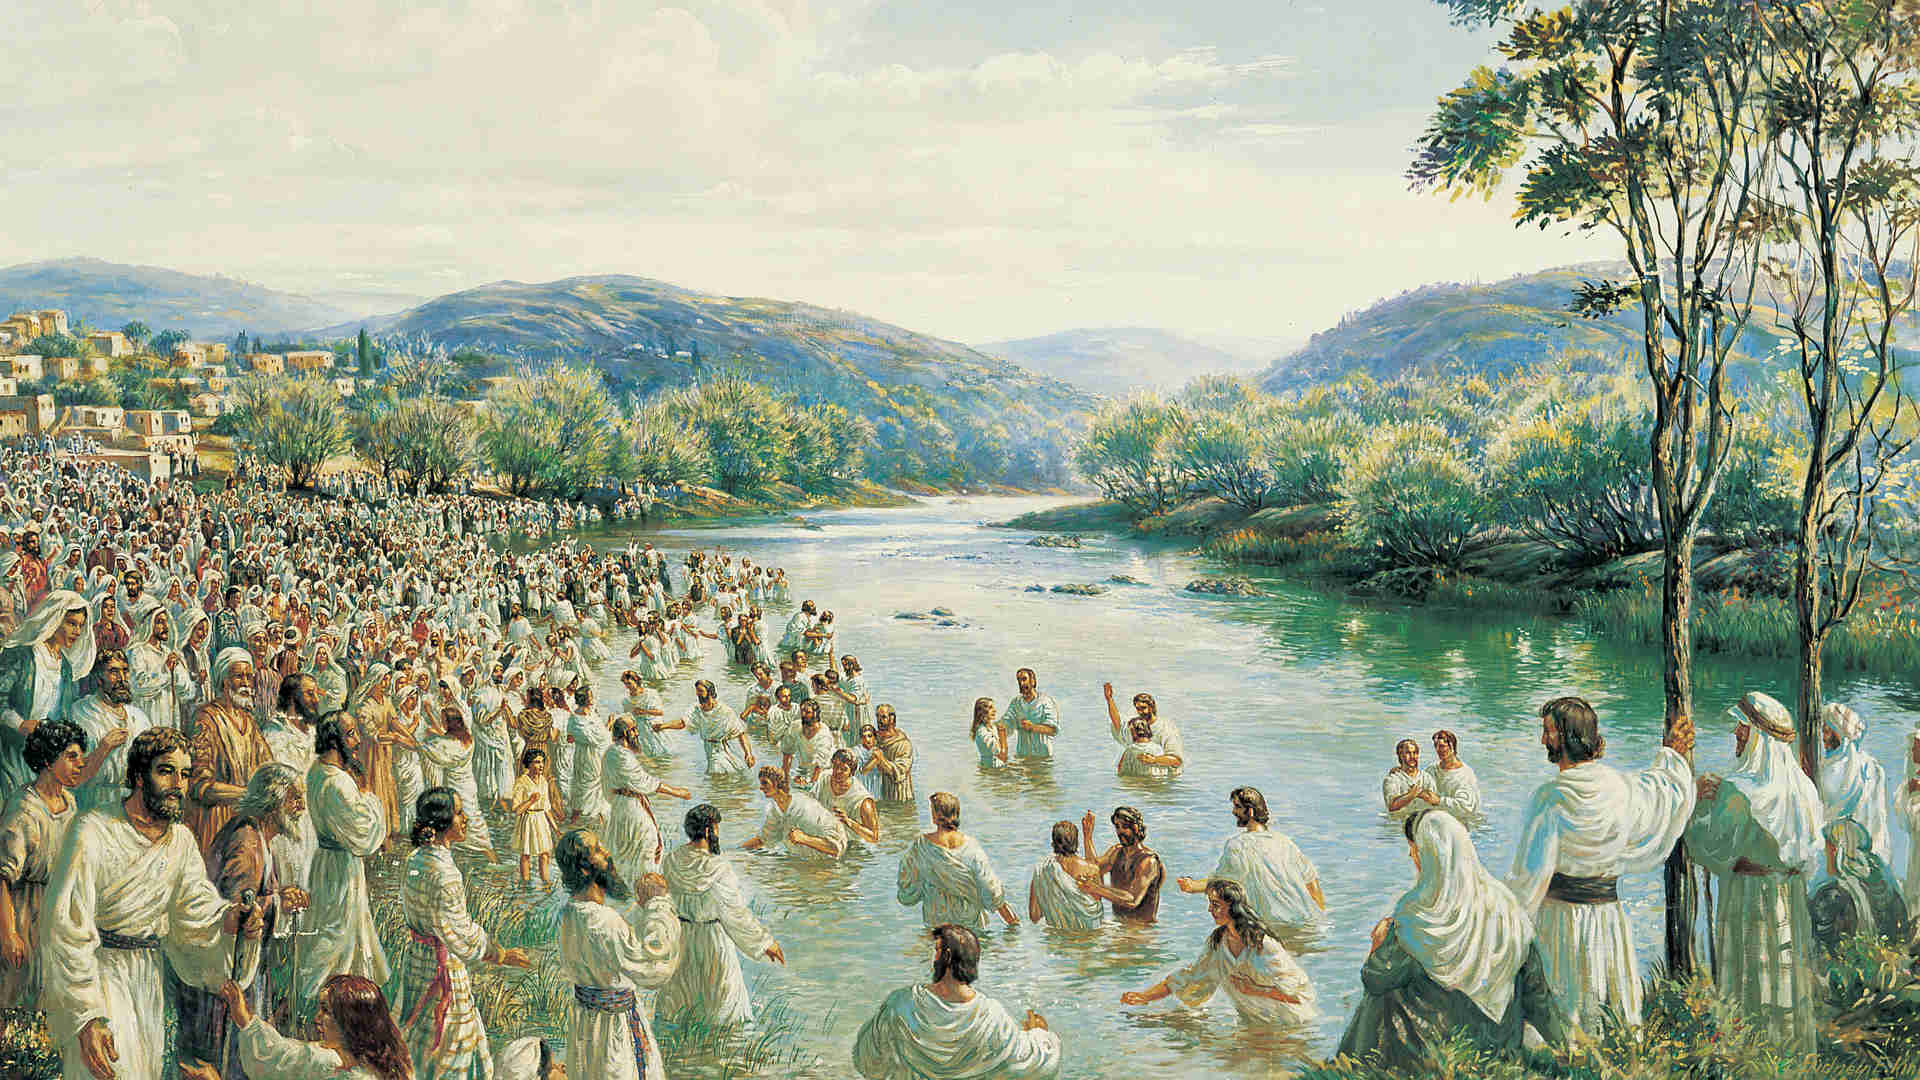 Sidney King's painting, "Day of Pentecost," depicting the baptisms occurring in the titular event in the New Testament